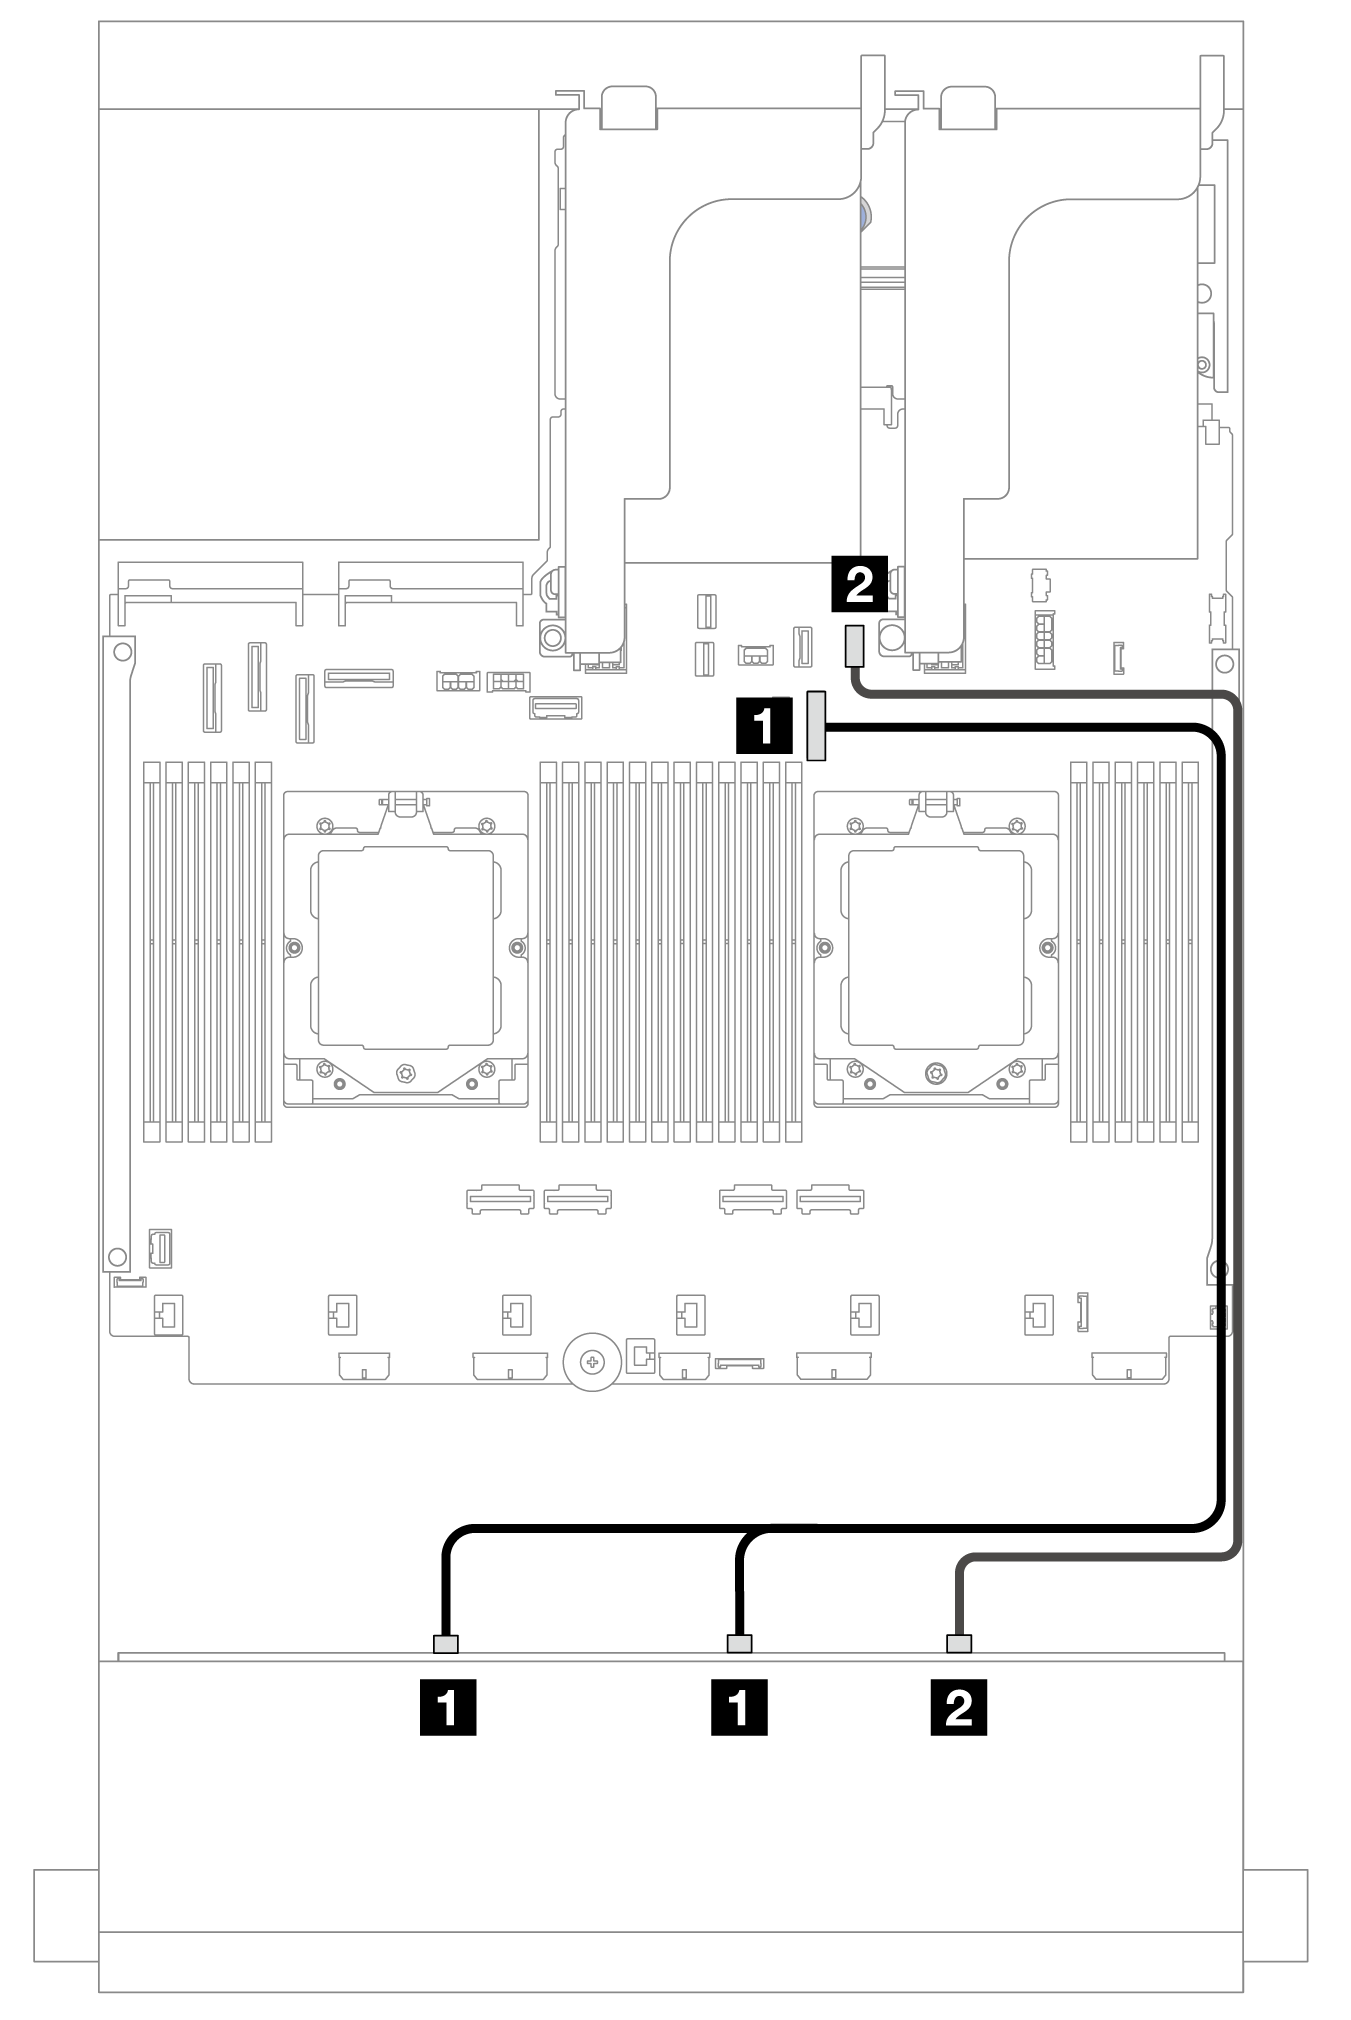 Cable routing to onboard SATA connectors when one processor installed